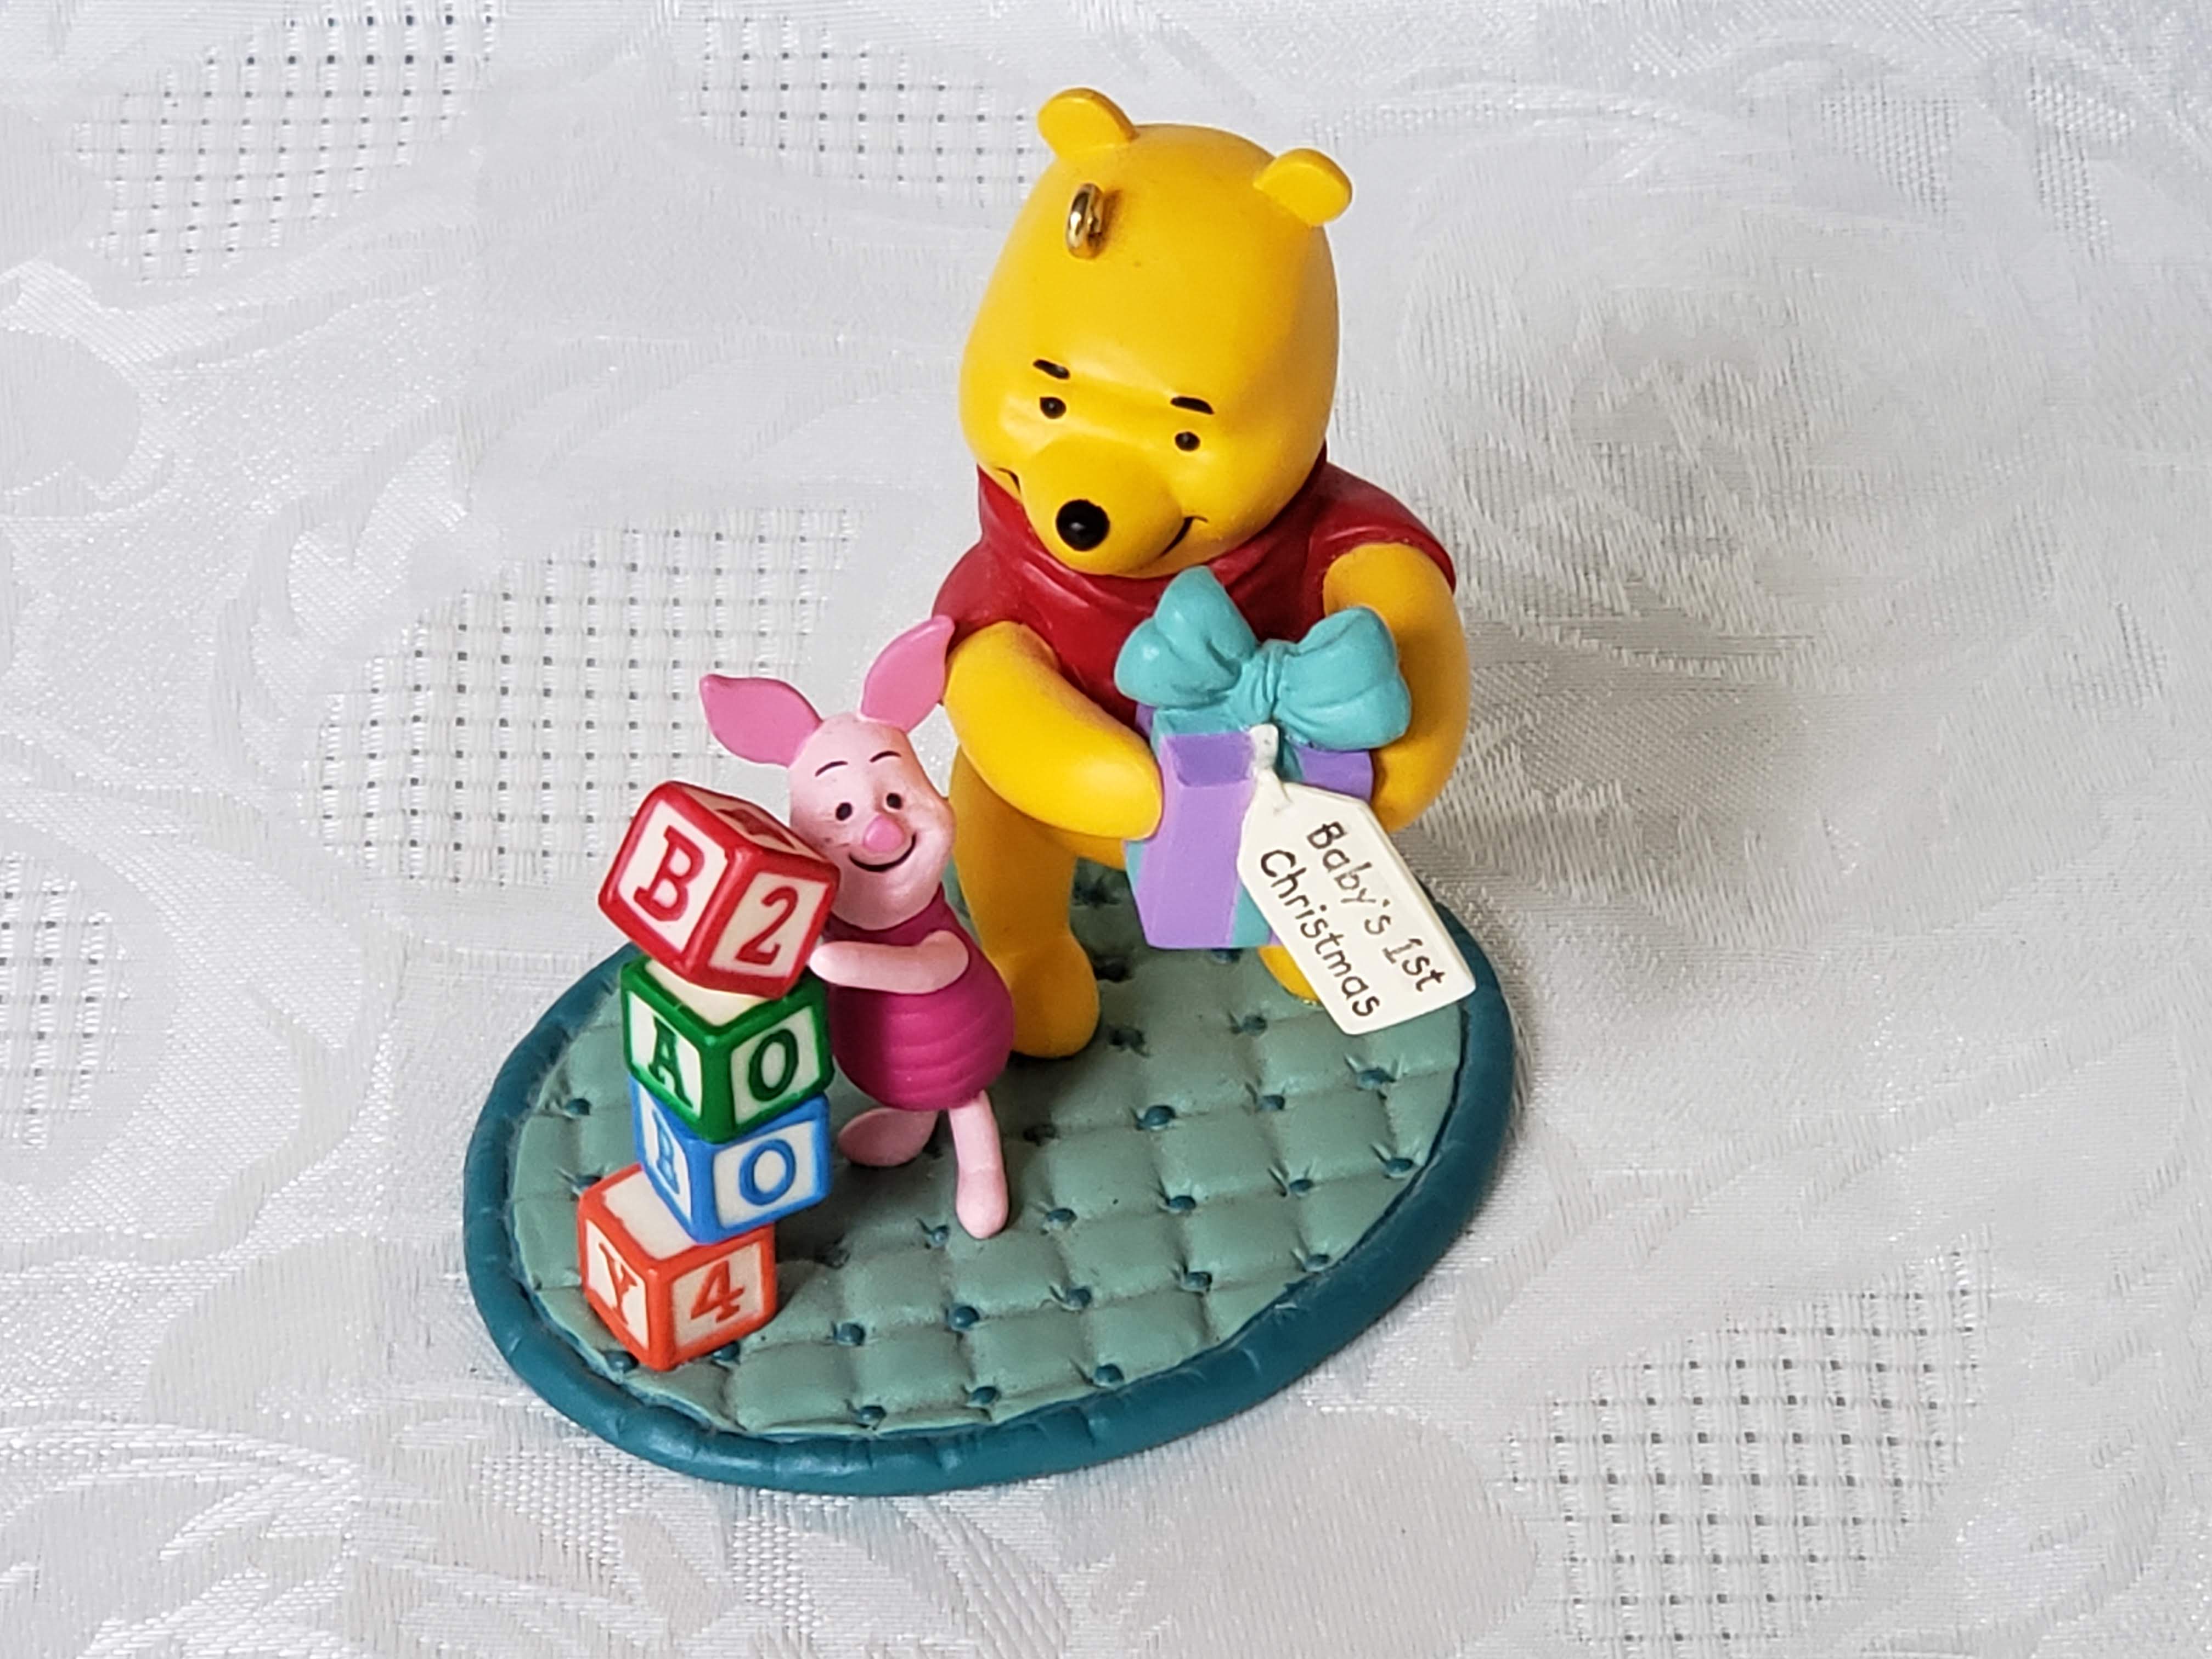 Winnie the pooh and Piglet ornament